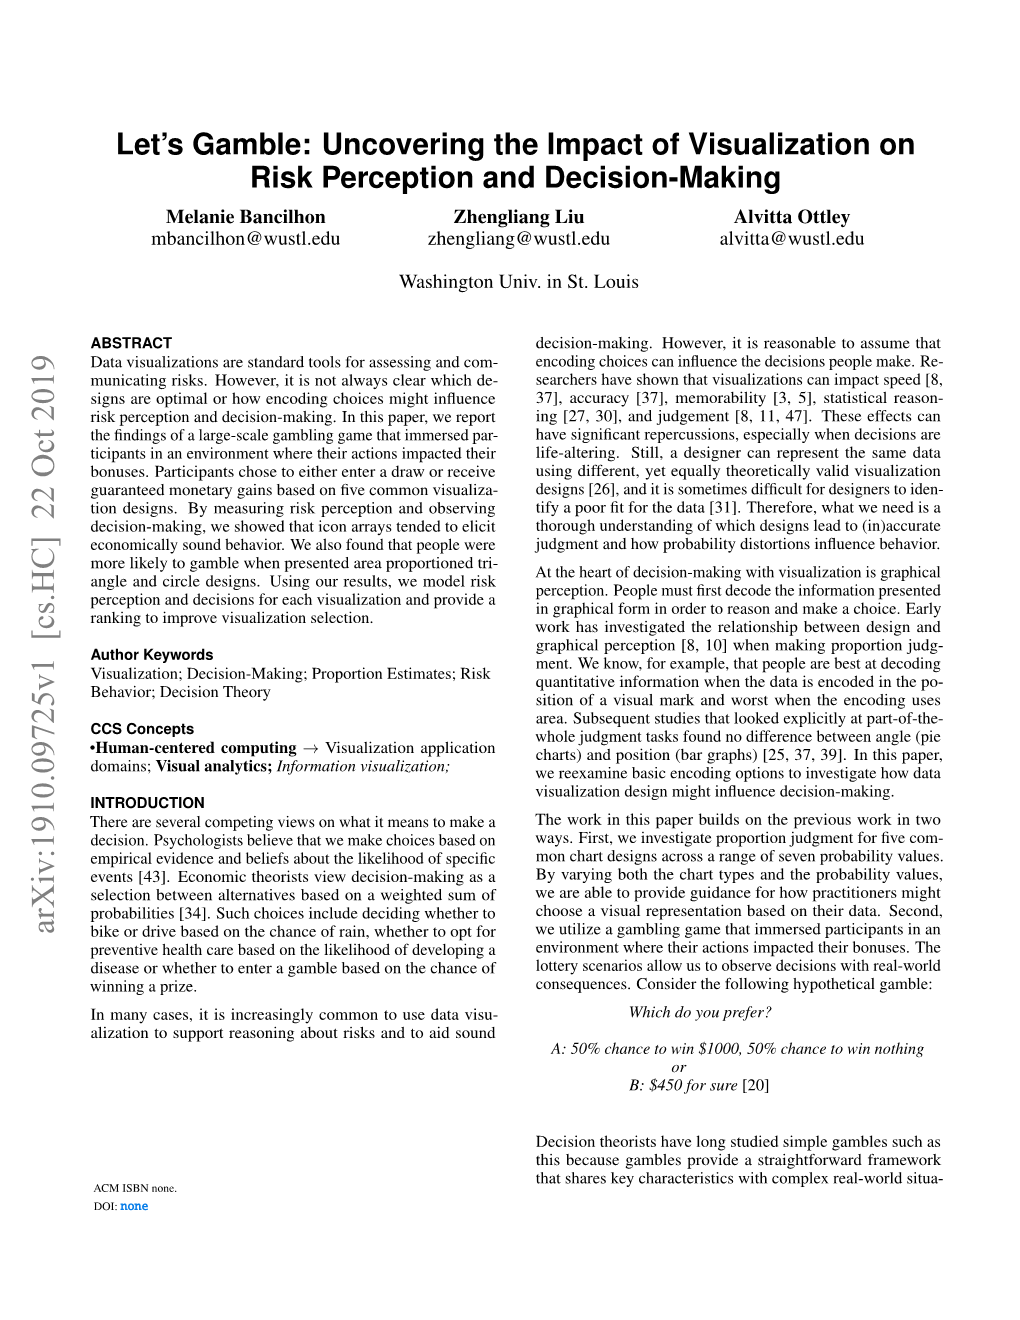 Let's Gamble: Uncovering the Impact of Visualization on Risk Perception and Decision-Making